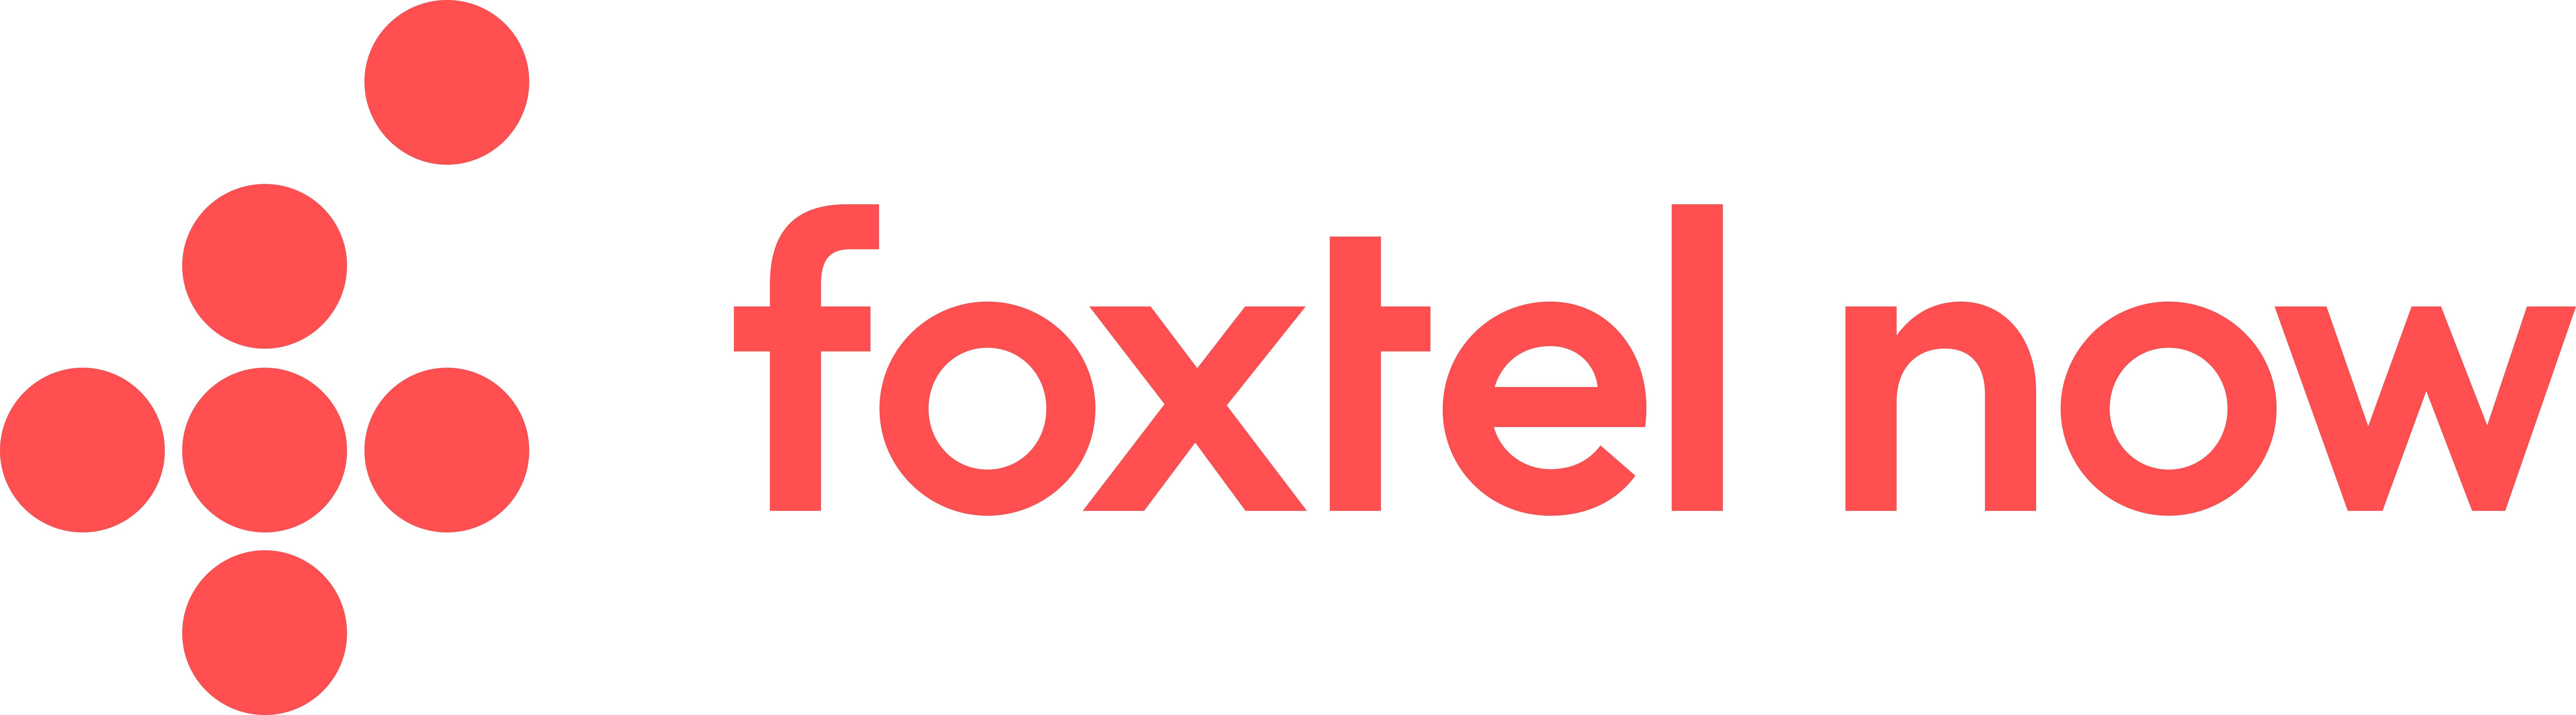 Foxtel Logo - Foxtel rebrands and officially launches Foxtel Now after conceding ...